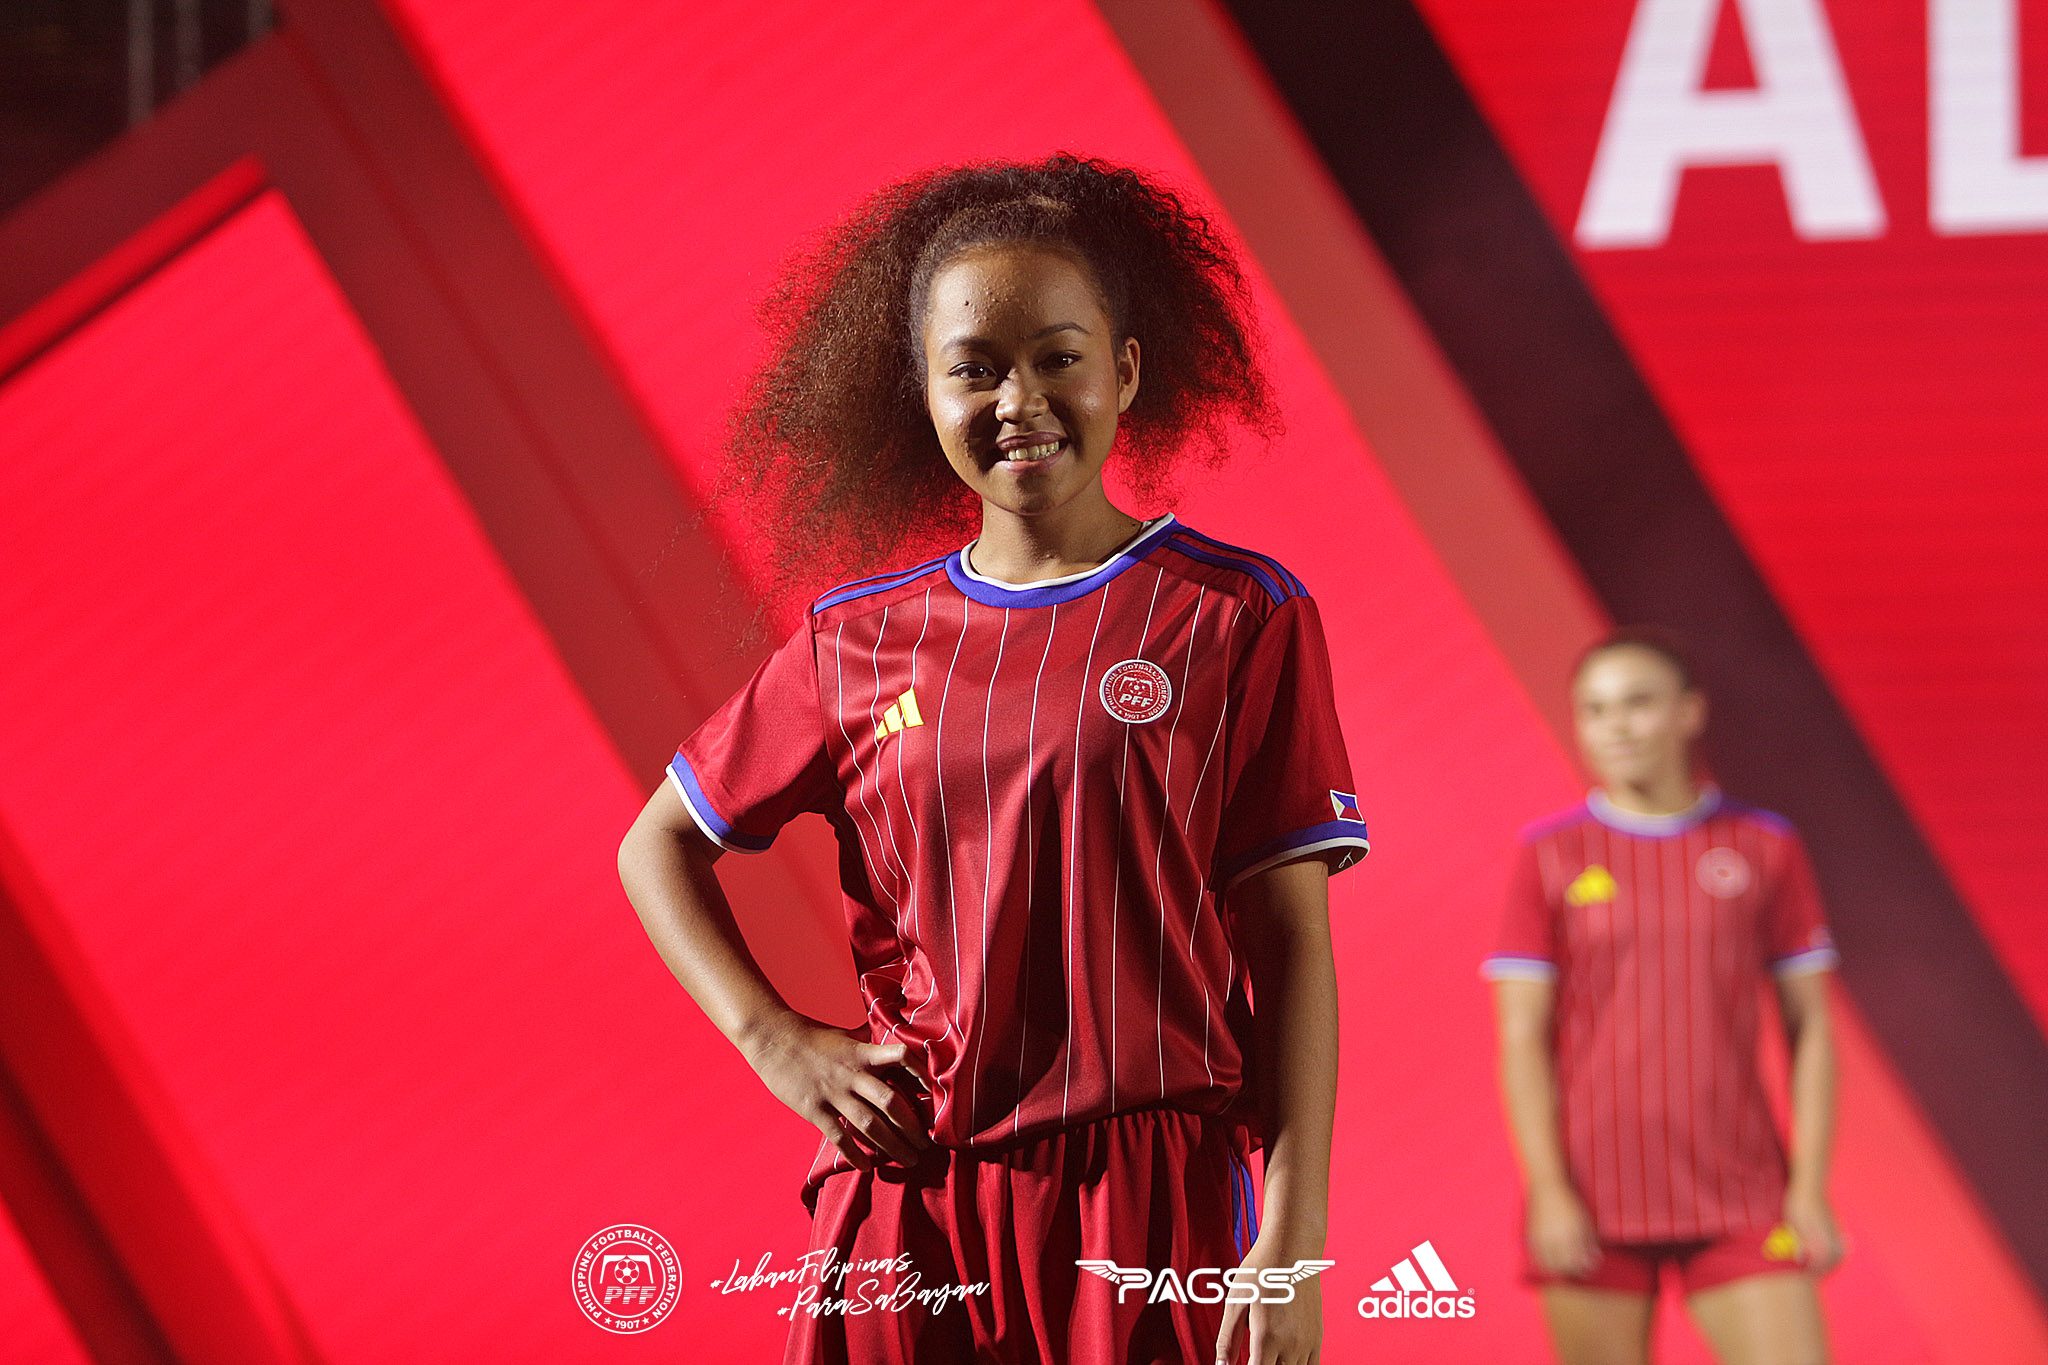 LOOK: 'Super excited' Filipinas unveil World kits